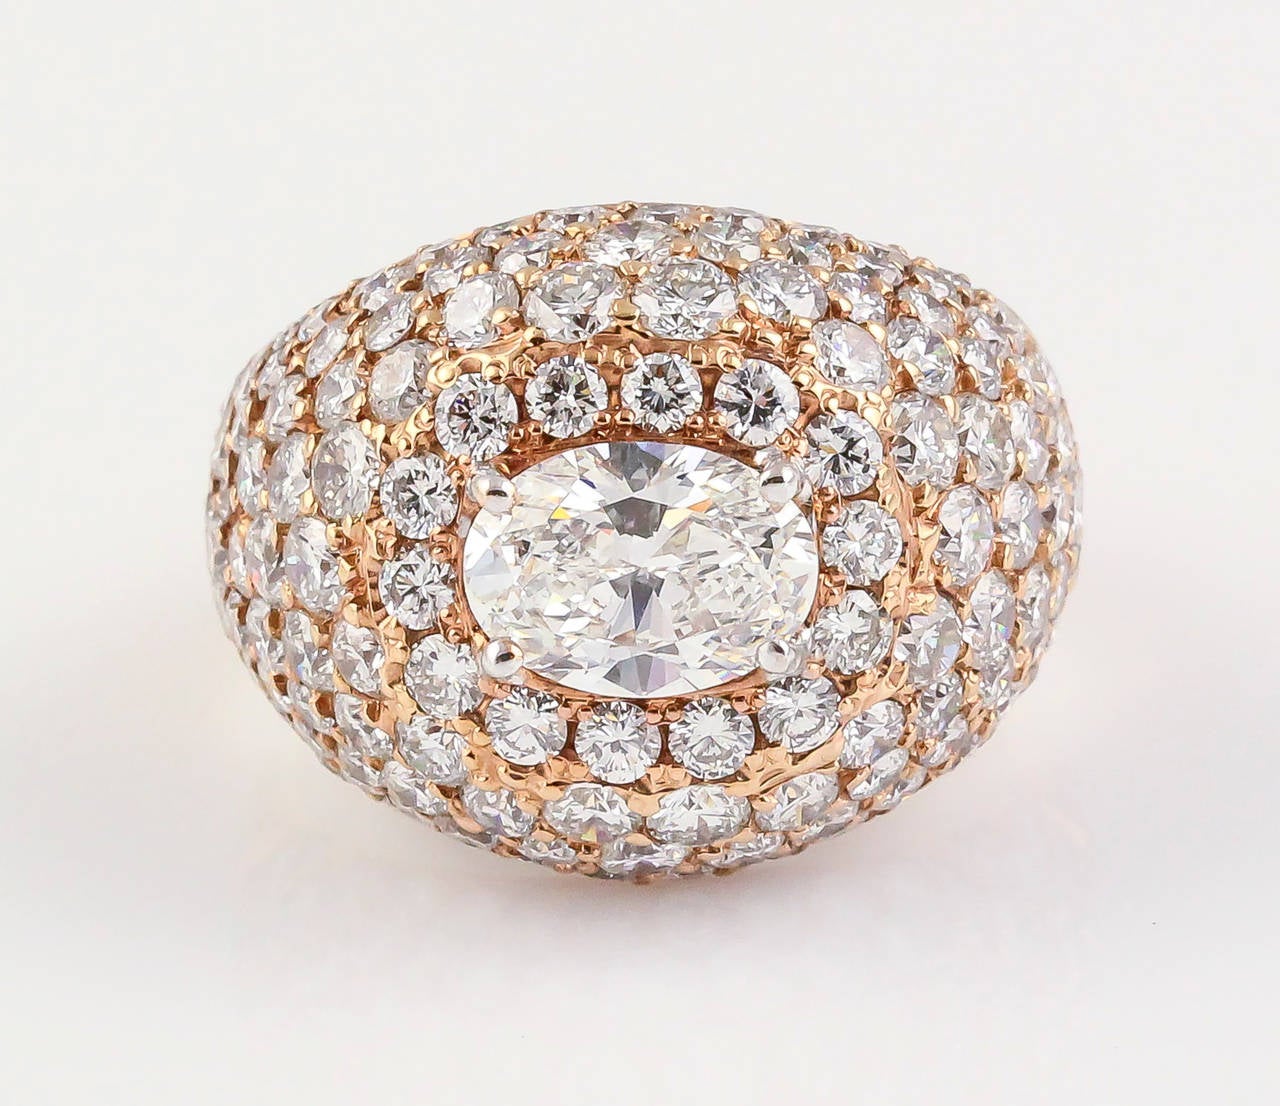 Impressive 18K pink gold and diamond dome ring of French origin. It features very high grade round brilliant cut diamonds, with an oval cut central stone with great clarity and nice color, approx F-G VS1-2 and approx. 1.50cts in weight. The ring is